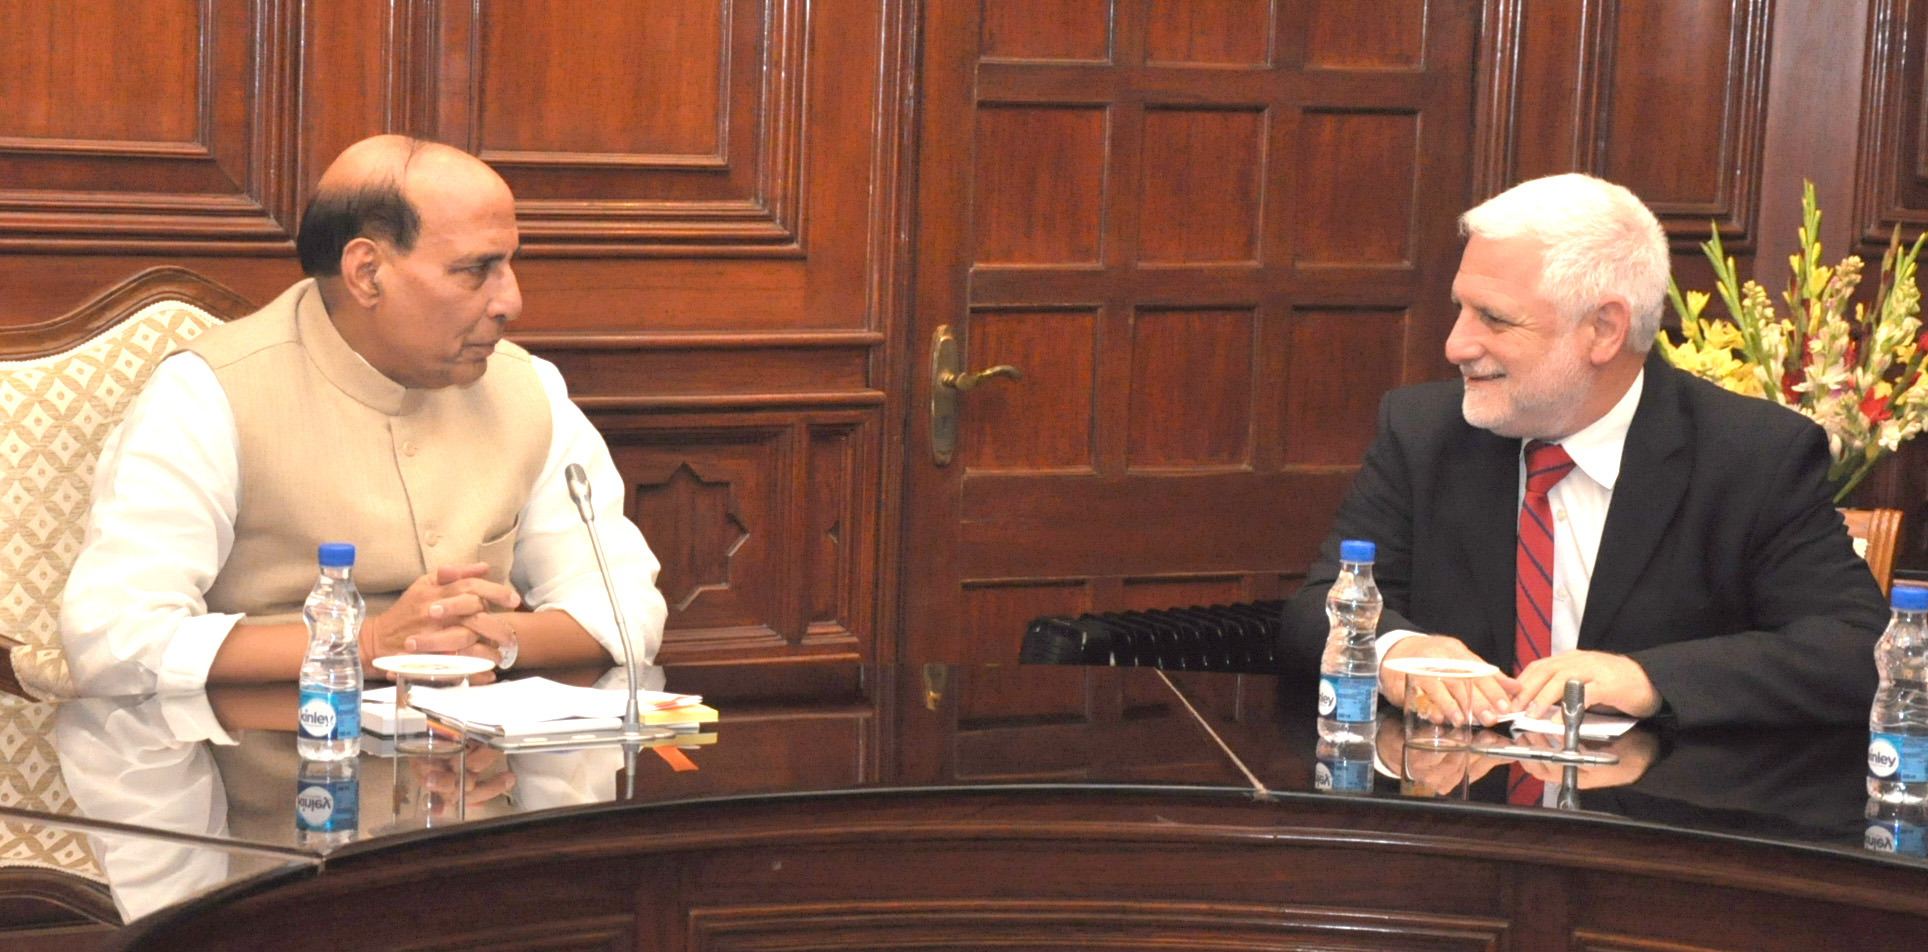 The Director-General of the Israeli Ministry of Defence, Maj. Gen. (Res.) Dan Harel calling on the Union Home Minister, Shri Rajnath Singh, in New Delhi on February 17, 2016.